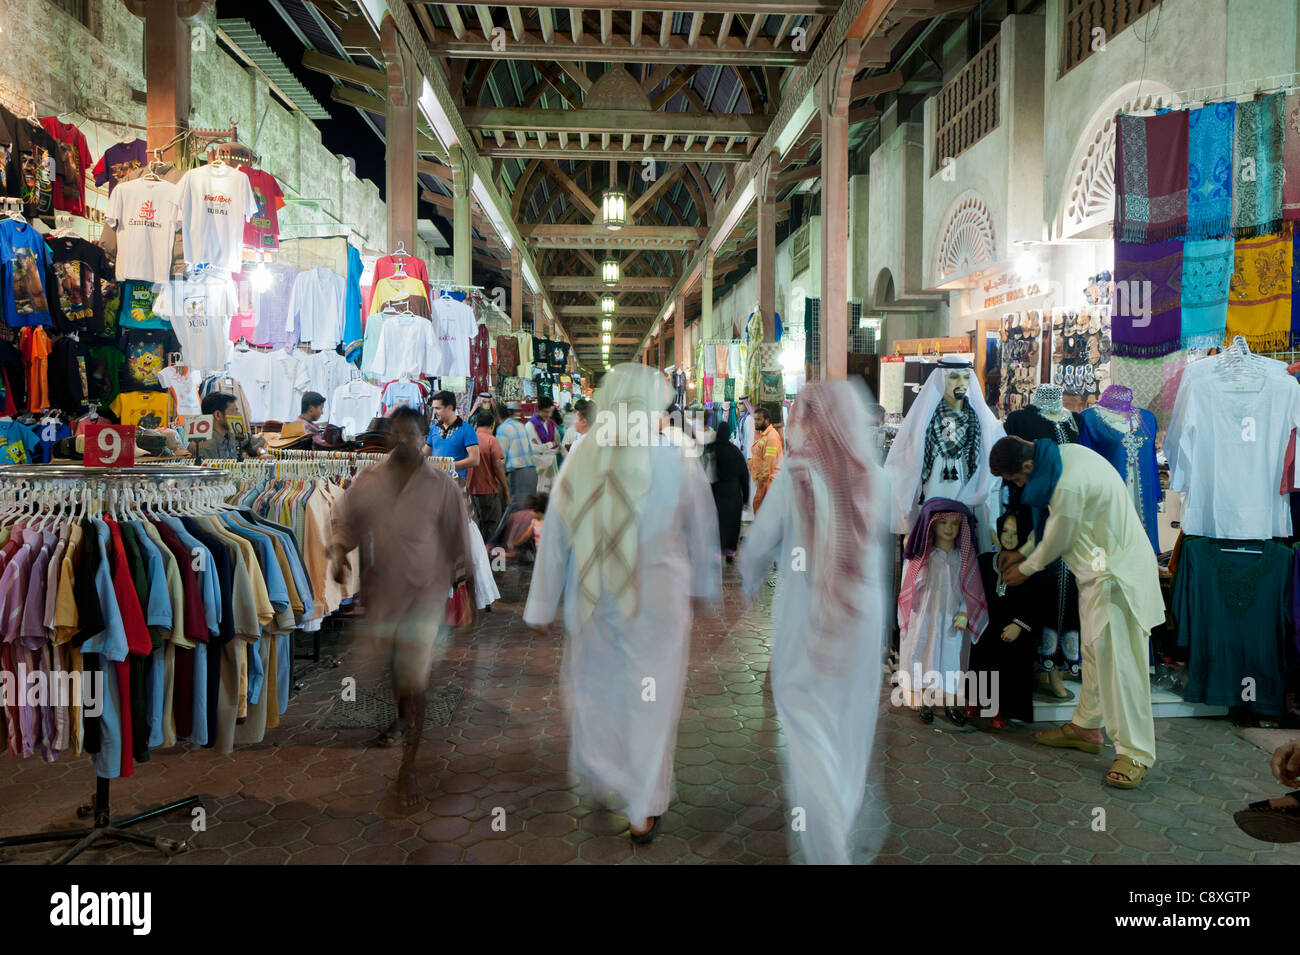 Night view of busy souq or market in Dubai UAE Middle East Stock Photo